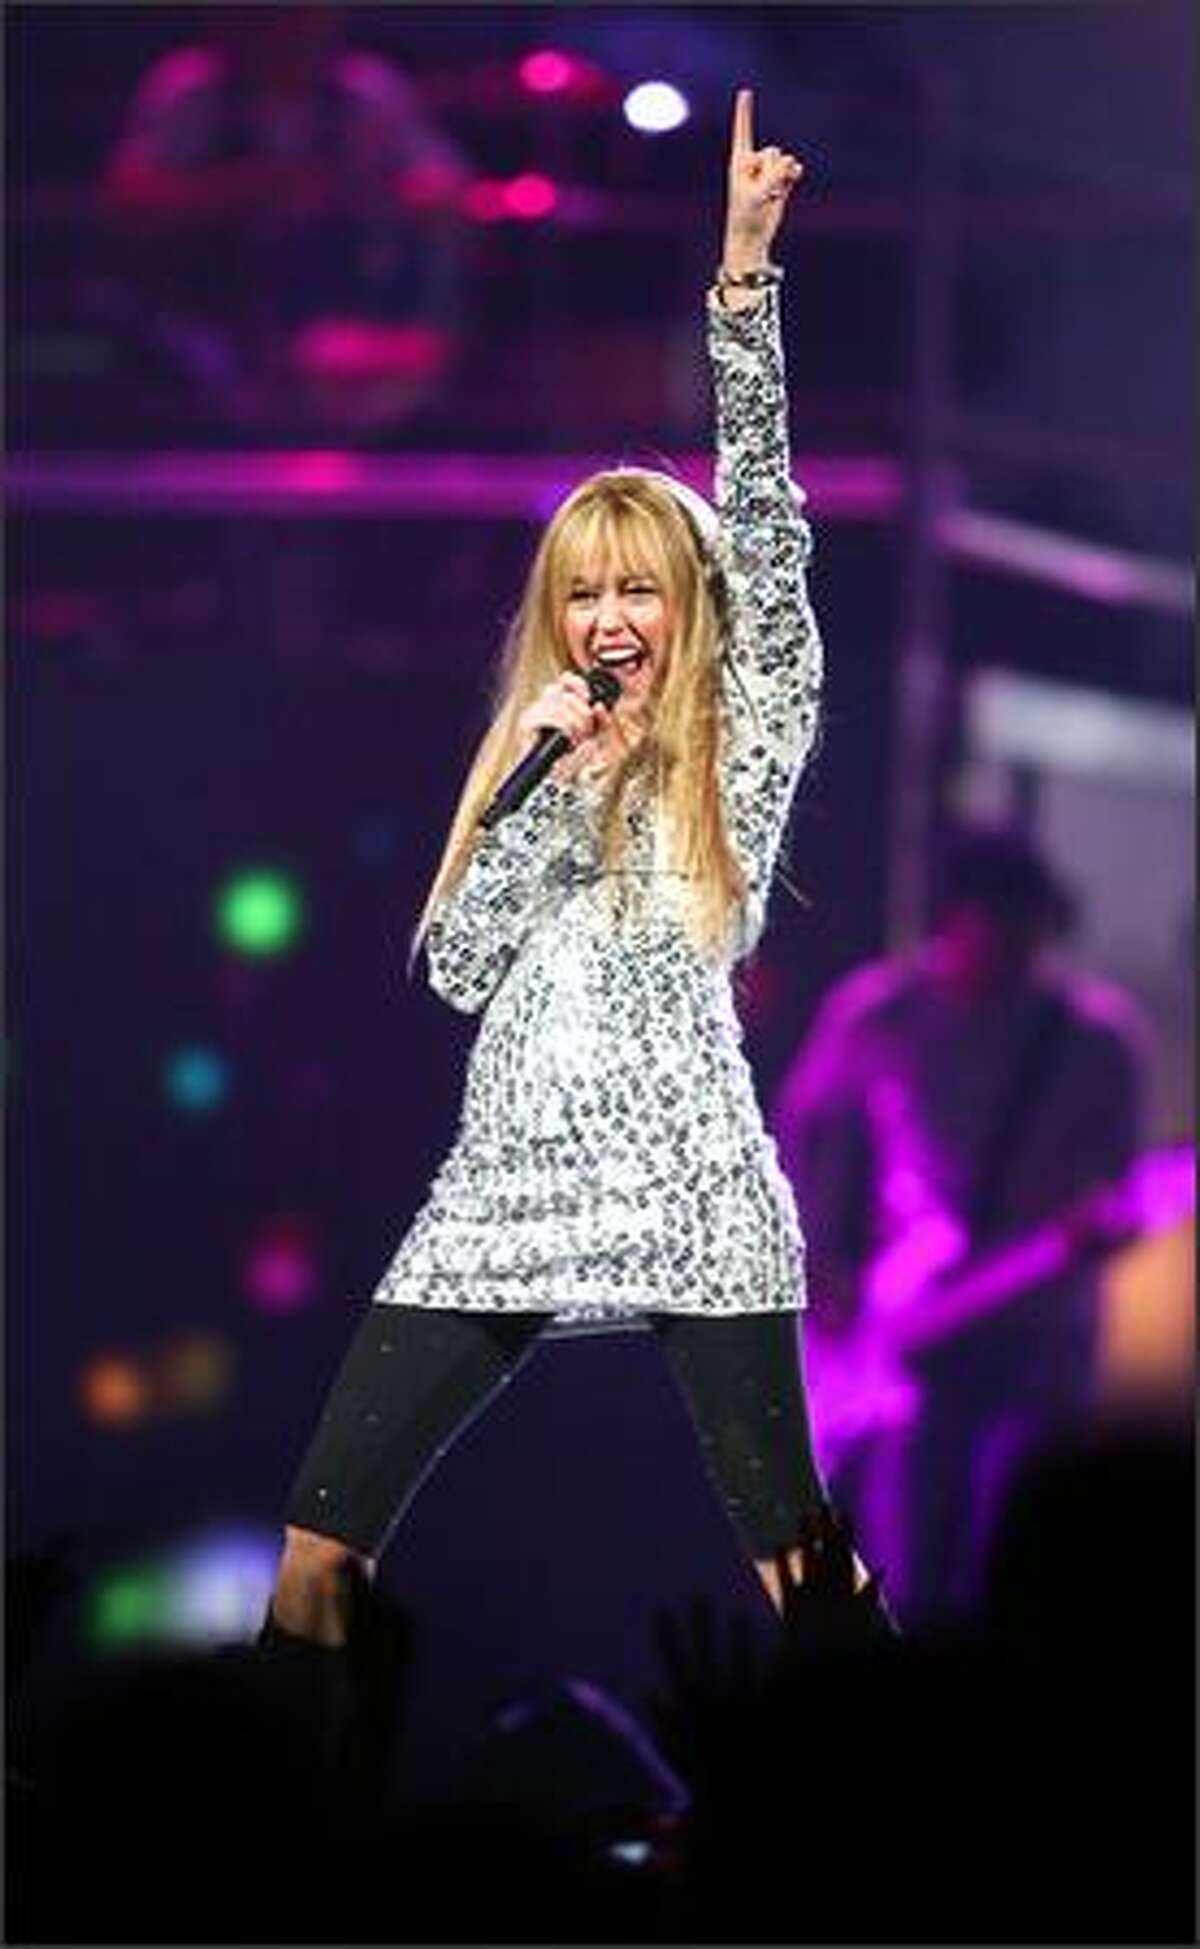 Miley Cyrus aka Hannah Montana performs during her concert at Key Arena.